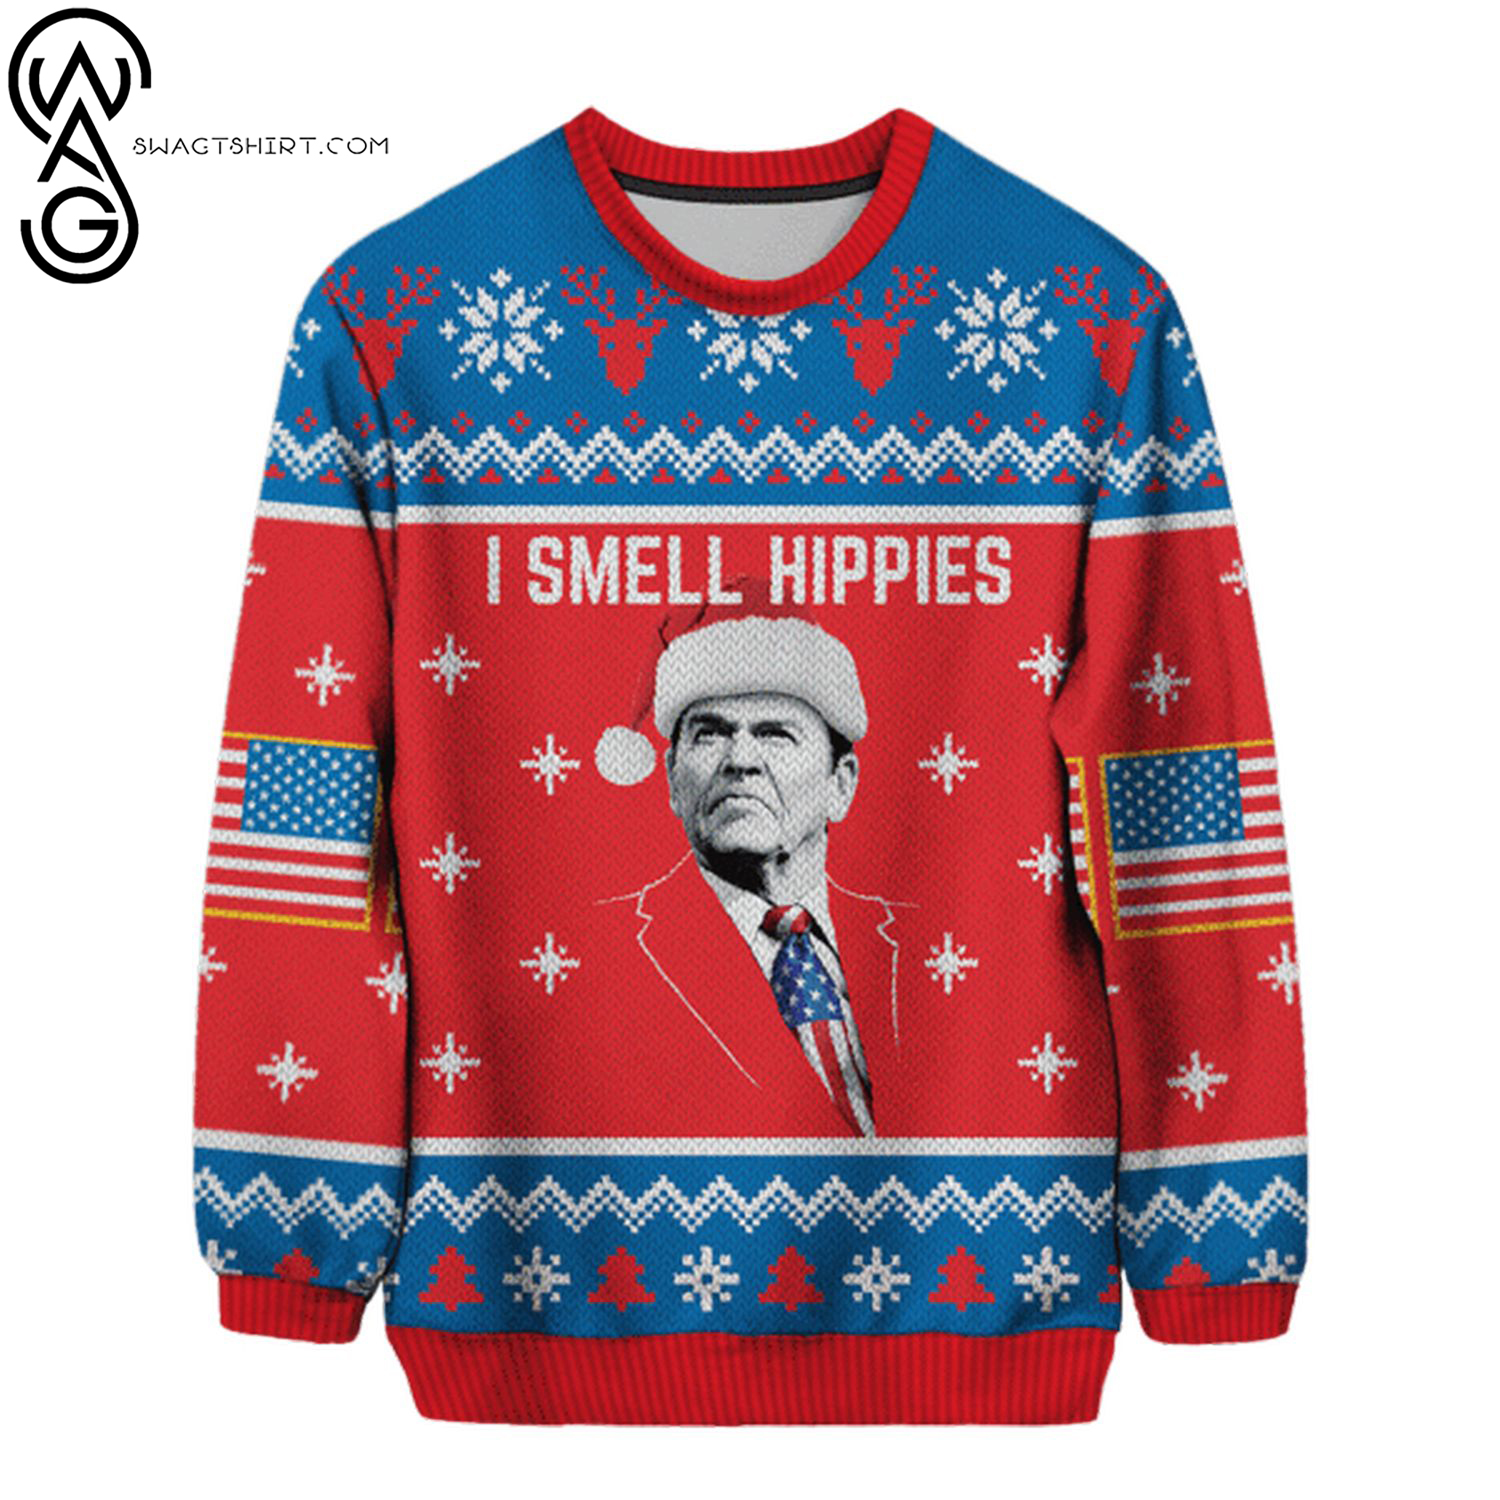 Ronald reagan i smell hippies ugly christmas sweater